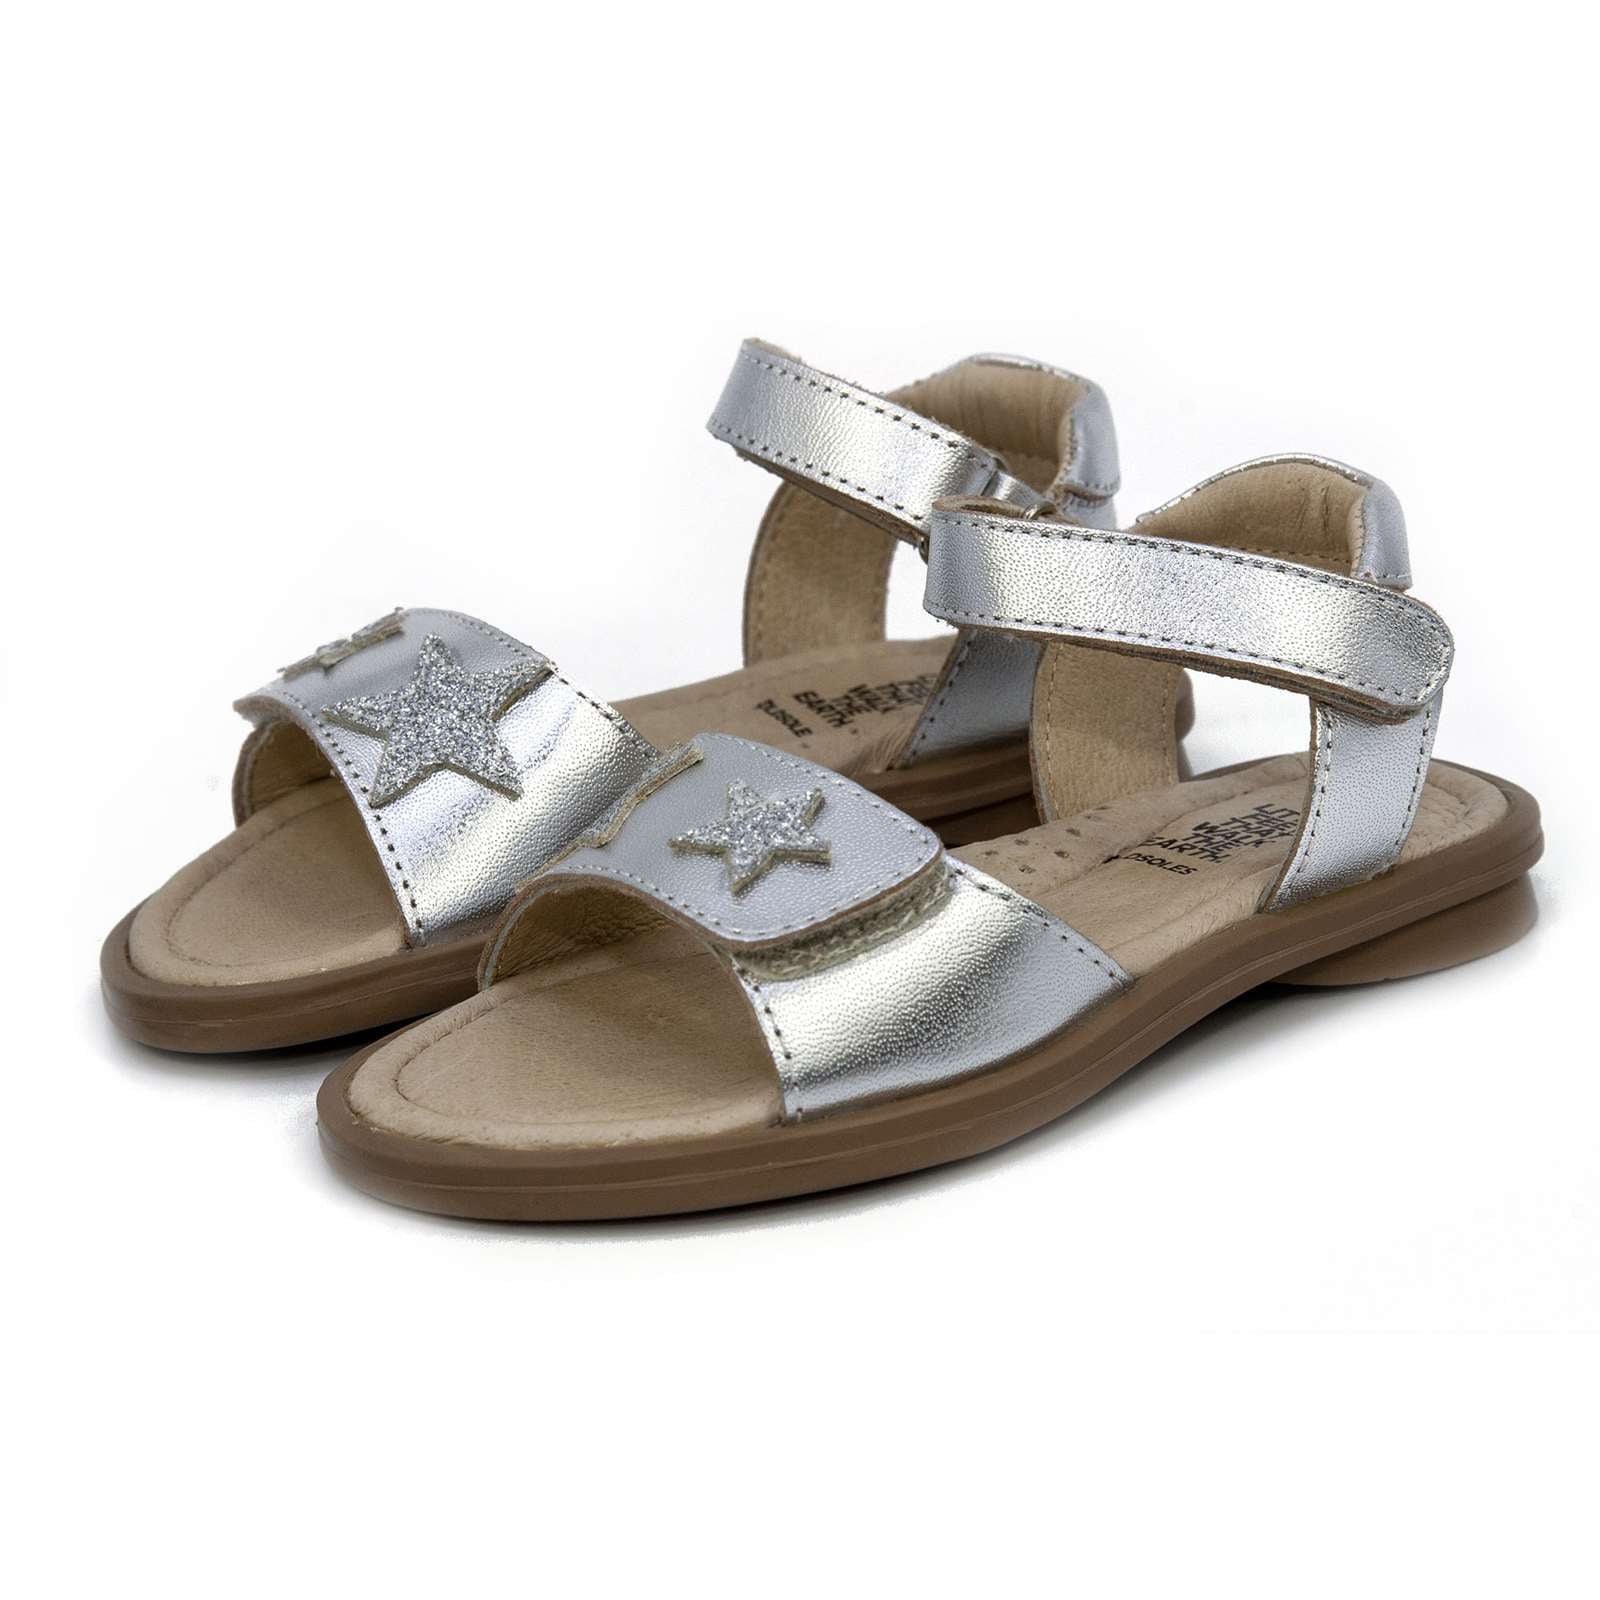 Old Soles Girl Star Born Sandals